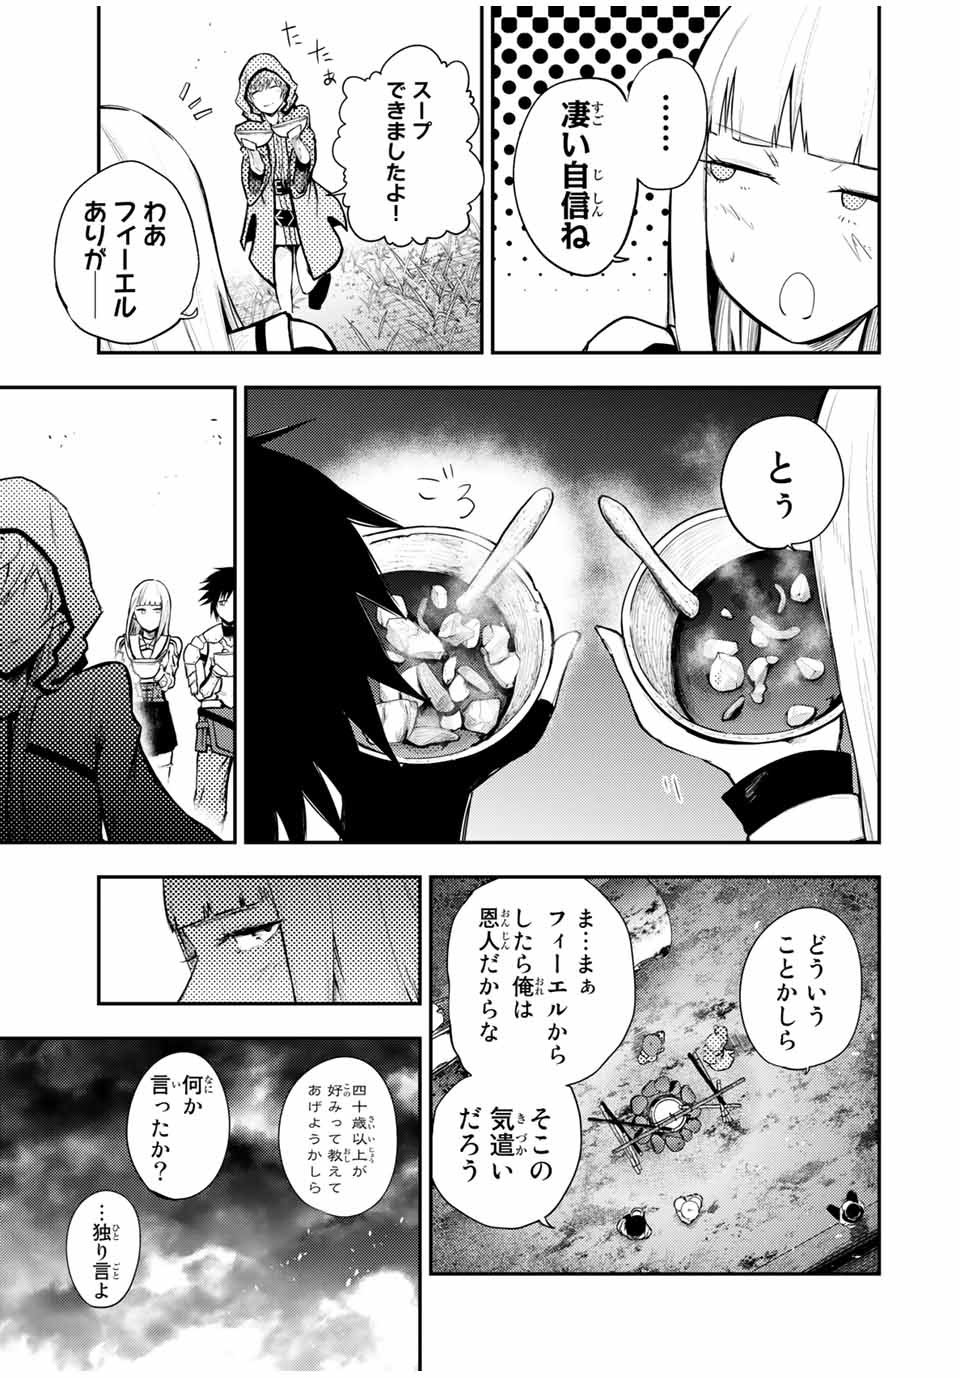 the strongest former prince-; 奴隷転生 ～その奴隷、最強の元王子につき～ 第27話 - Page 5